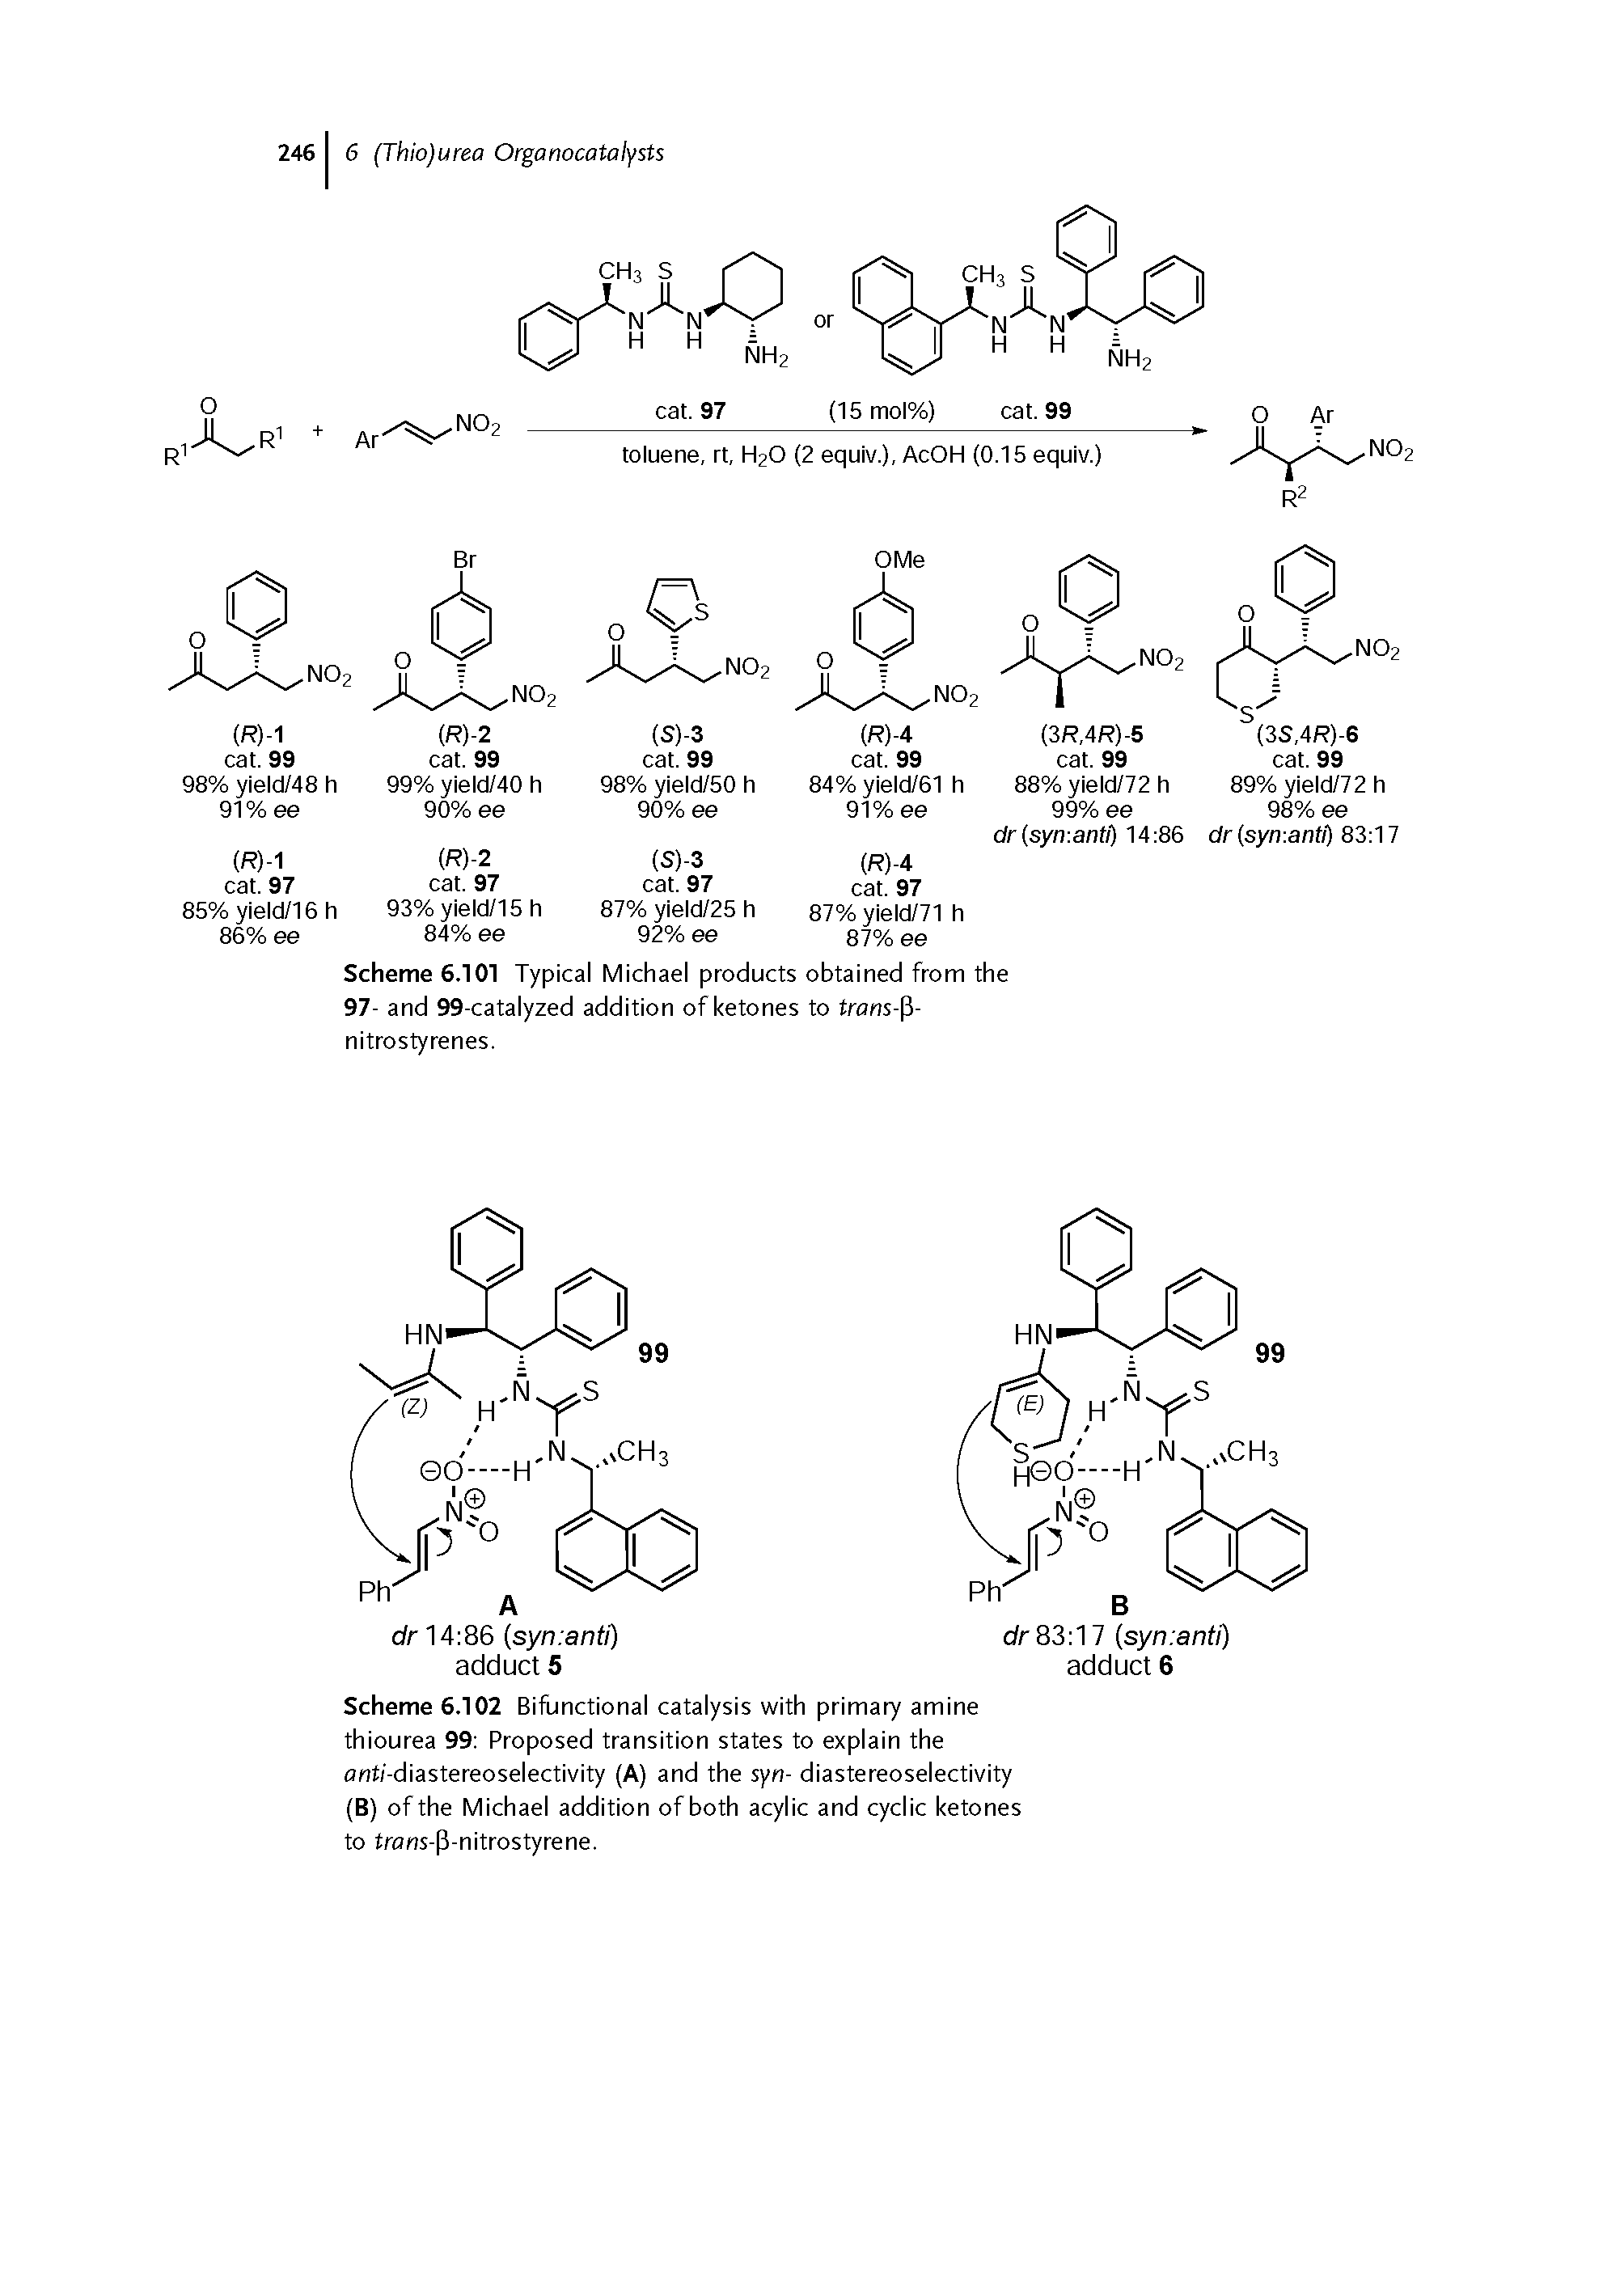 Scheme 6.101 Typical Michael products obtained from the 97- and 99-catalyzed addition of ketones to frans-P-nitrostyrenes.